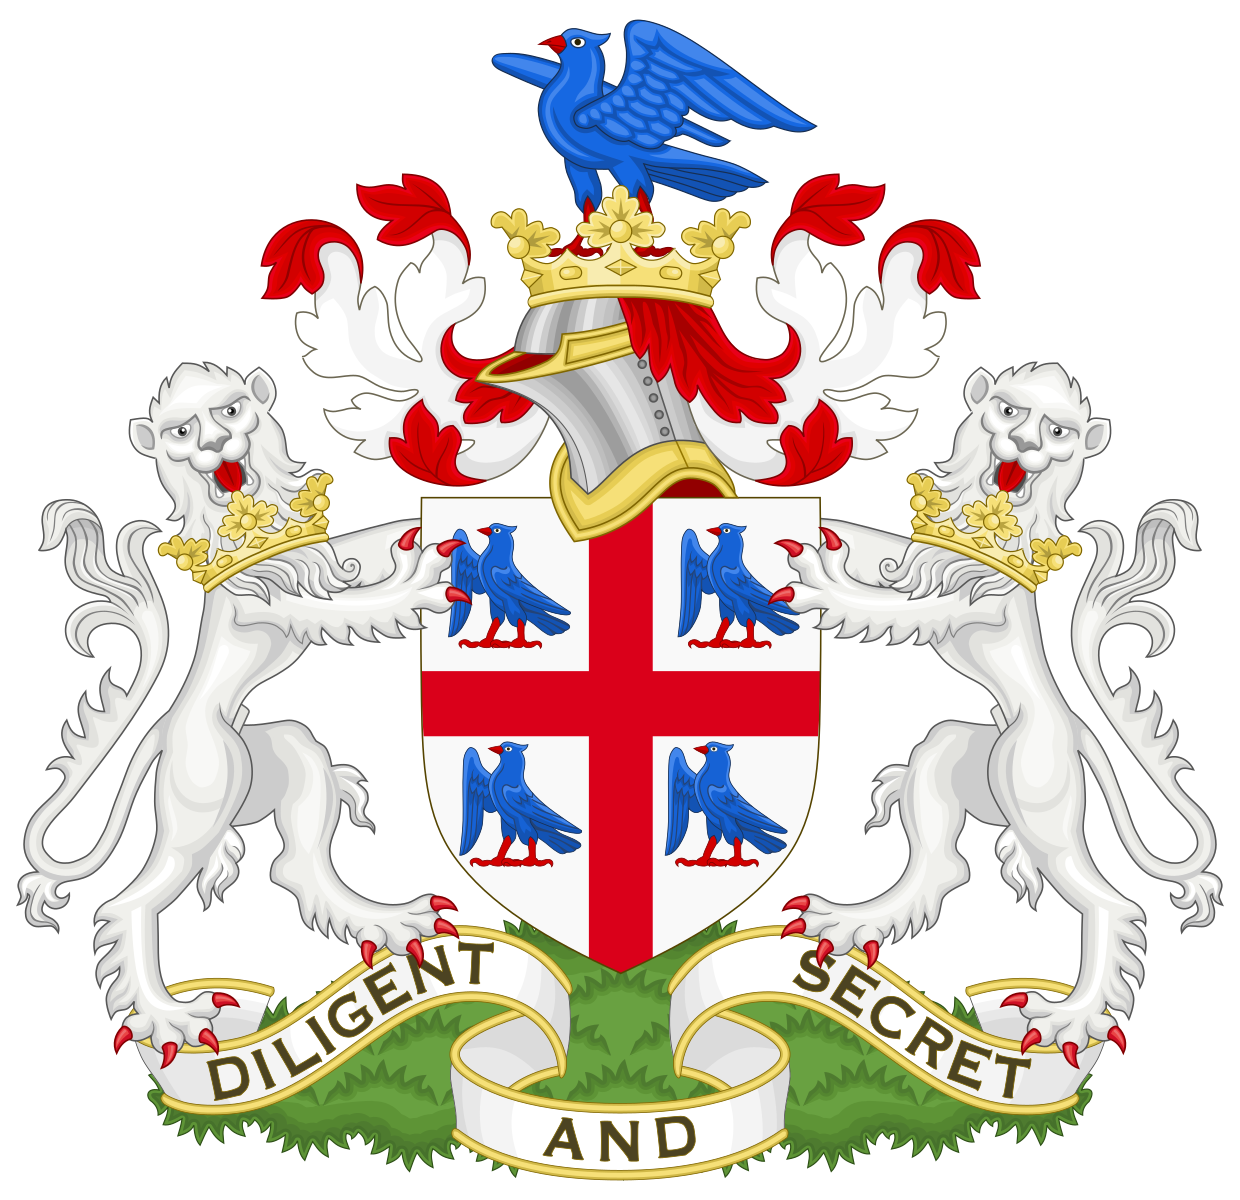 https://commons.wikimedia.org/wiki/File:Coat_of_Arms_of_the_College_of_Arms.svg